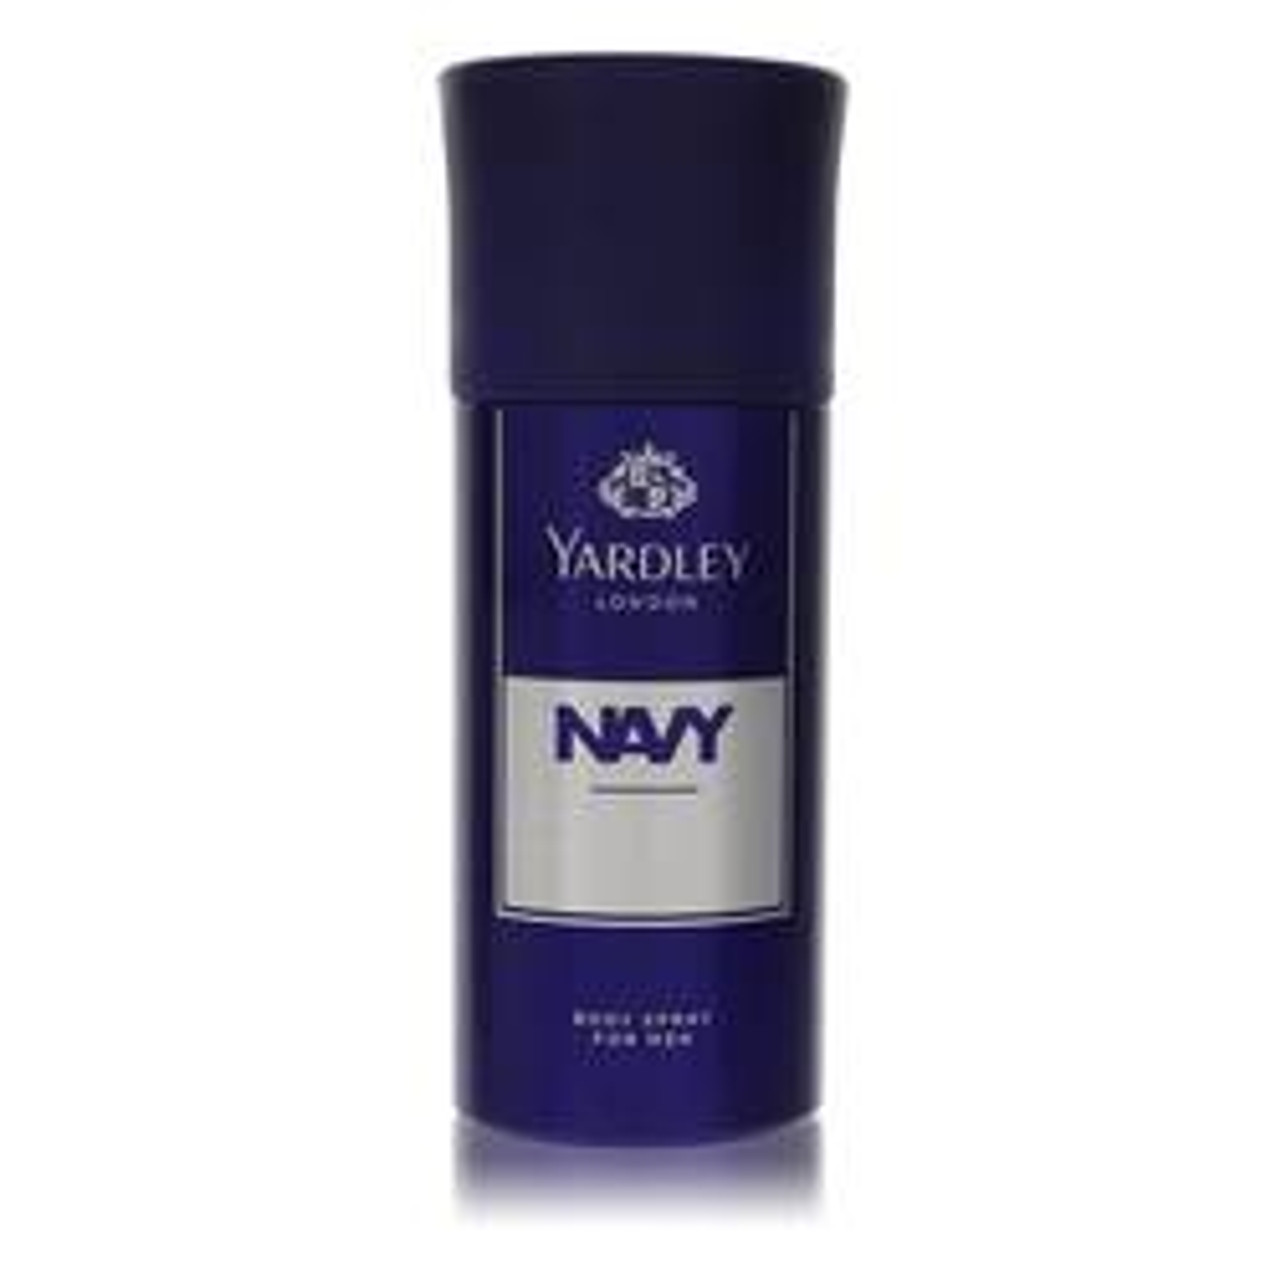 Yardley Navy Cologne By Yardley London Body Spray 5.1 oz for Men - [From 31.00 - Choose pk Qty ] - *Ships from Miami